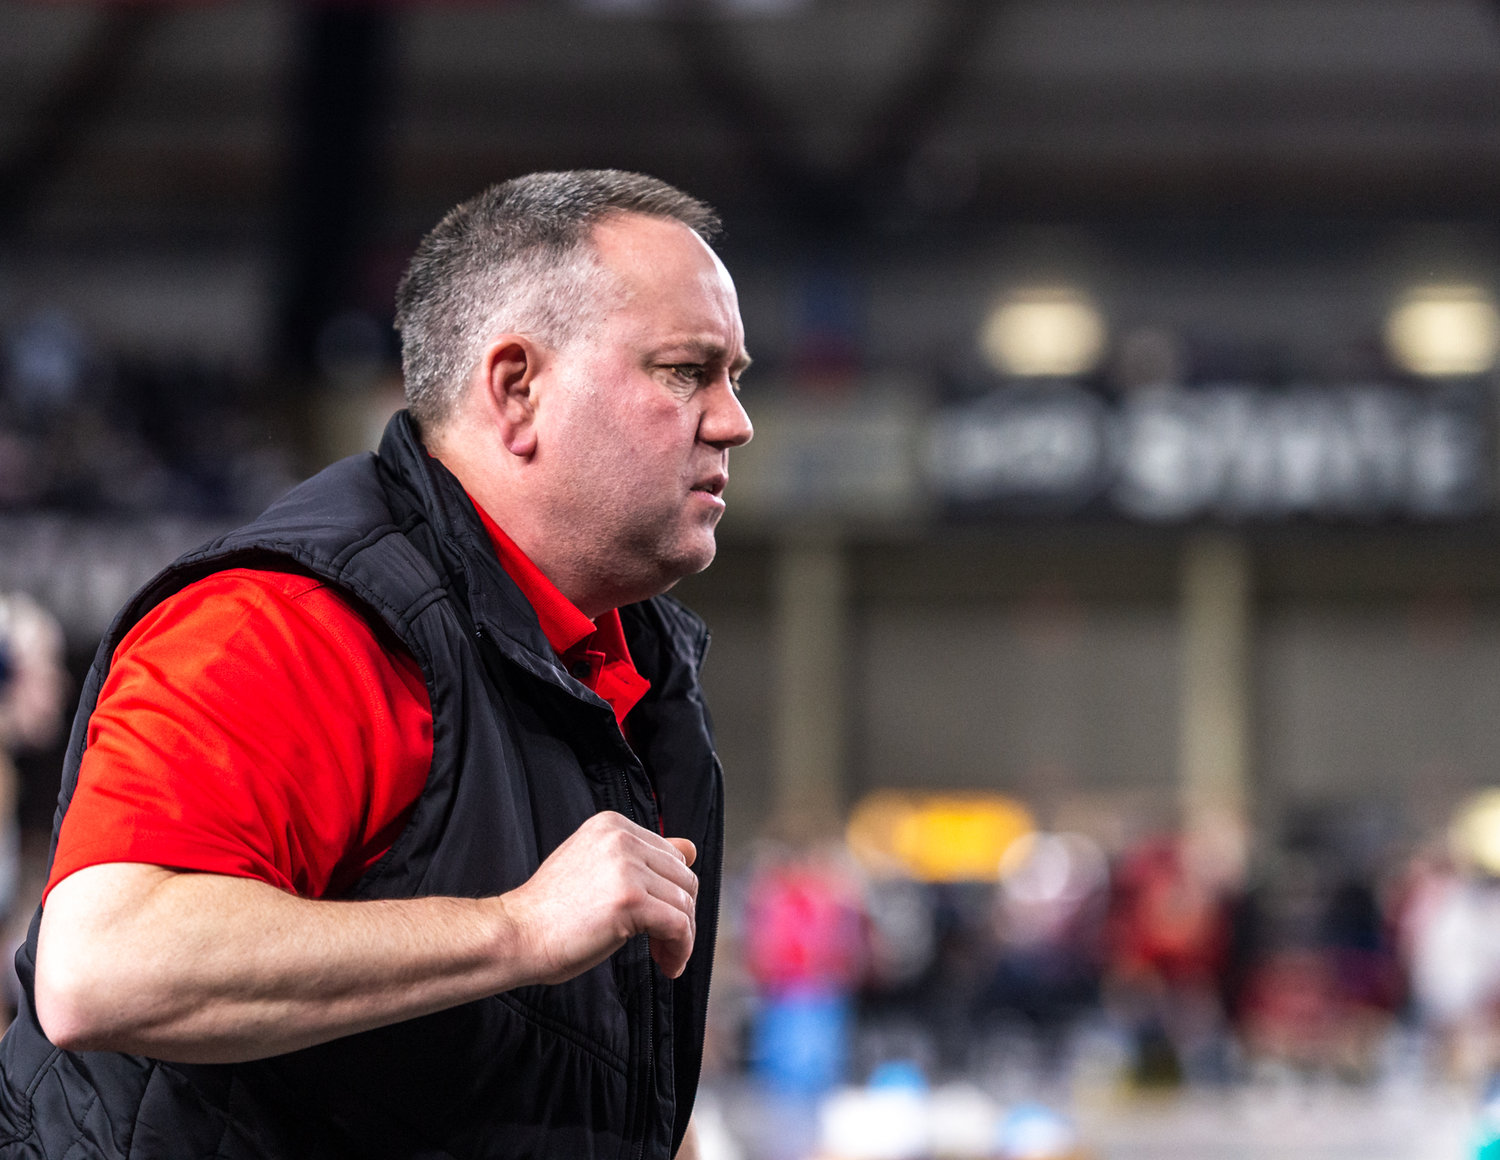 A Yelm coach watches his grappler at Mat Classic XXXIV on Friday, February 17, 2023, at the Tacoma Dome. (Joshua Hart/For The Chronicle)